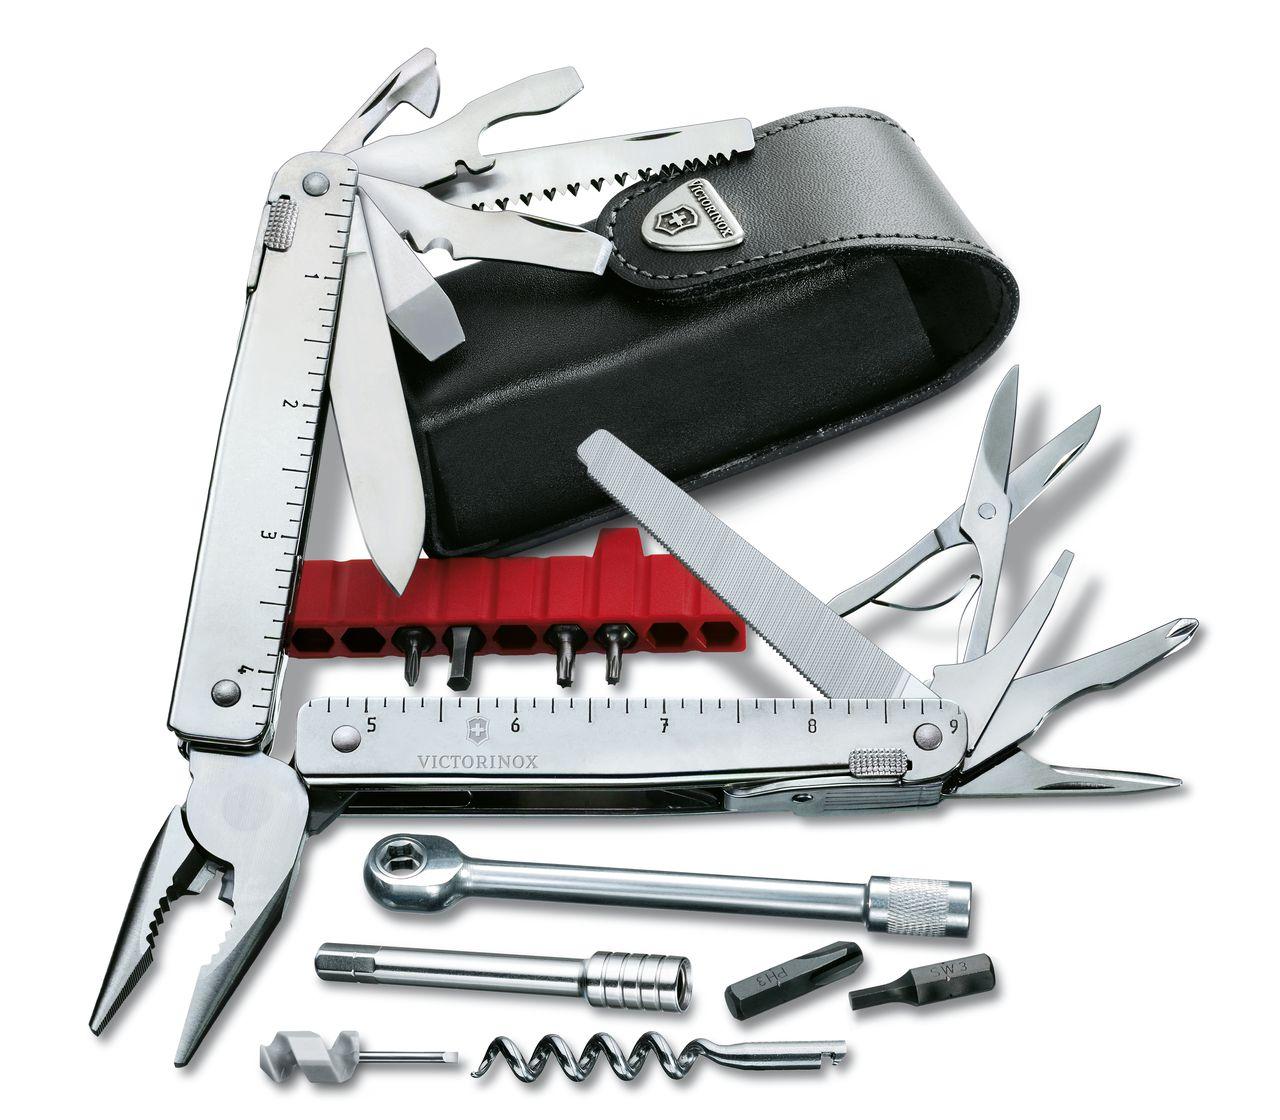 Victorinox Bit Wrench and Bit Kit designed for use with Swiss Tool 